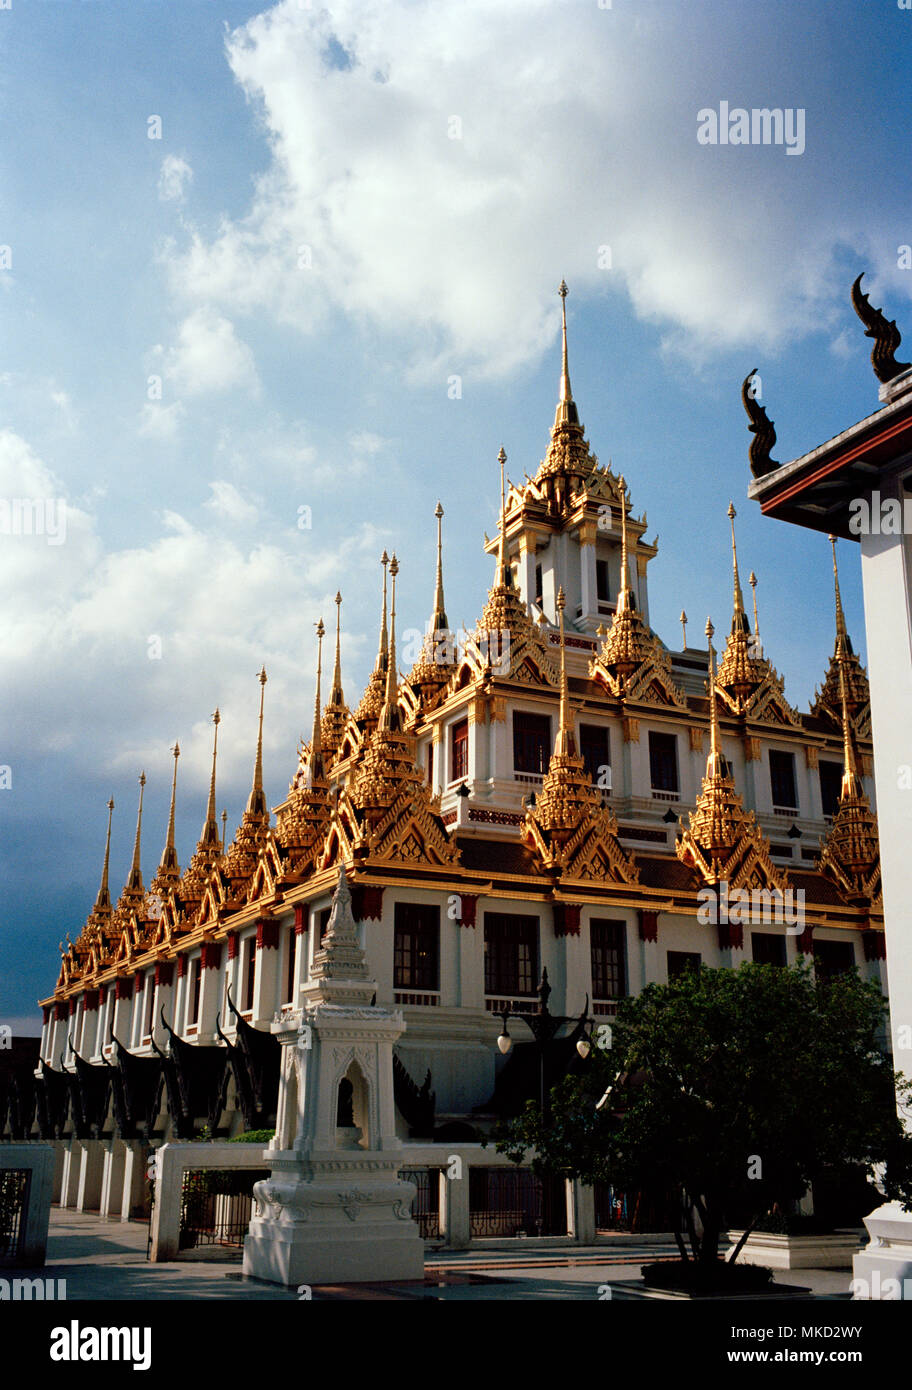 Thai Buddhism - Spires of the Buddhist temple Loha Prasat Metal Castle of Wat Ratchanadda in Bangkok in Thailand in Southeast Asia Far East. Travel Stock Photo